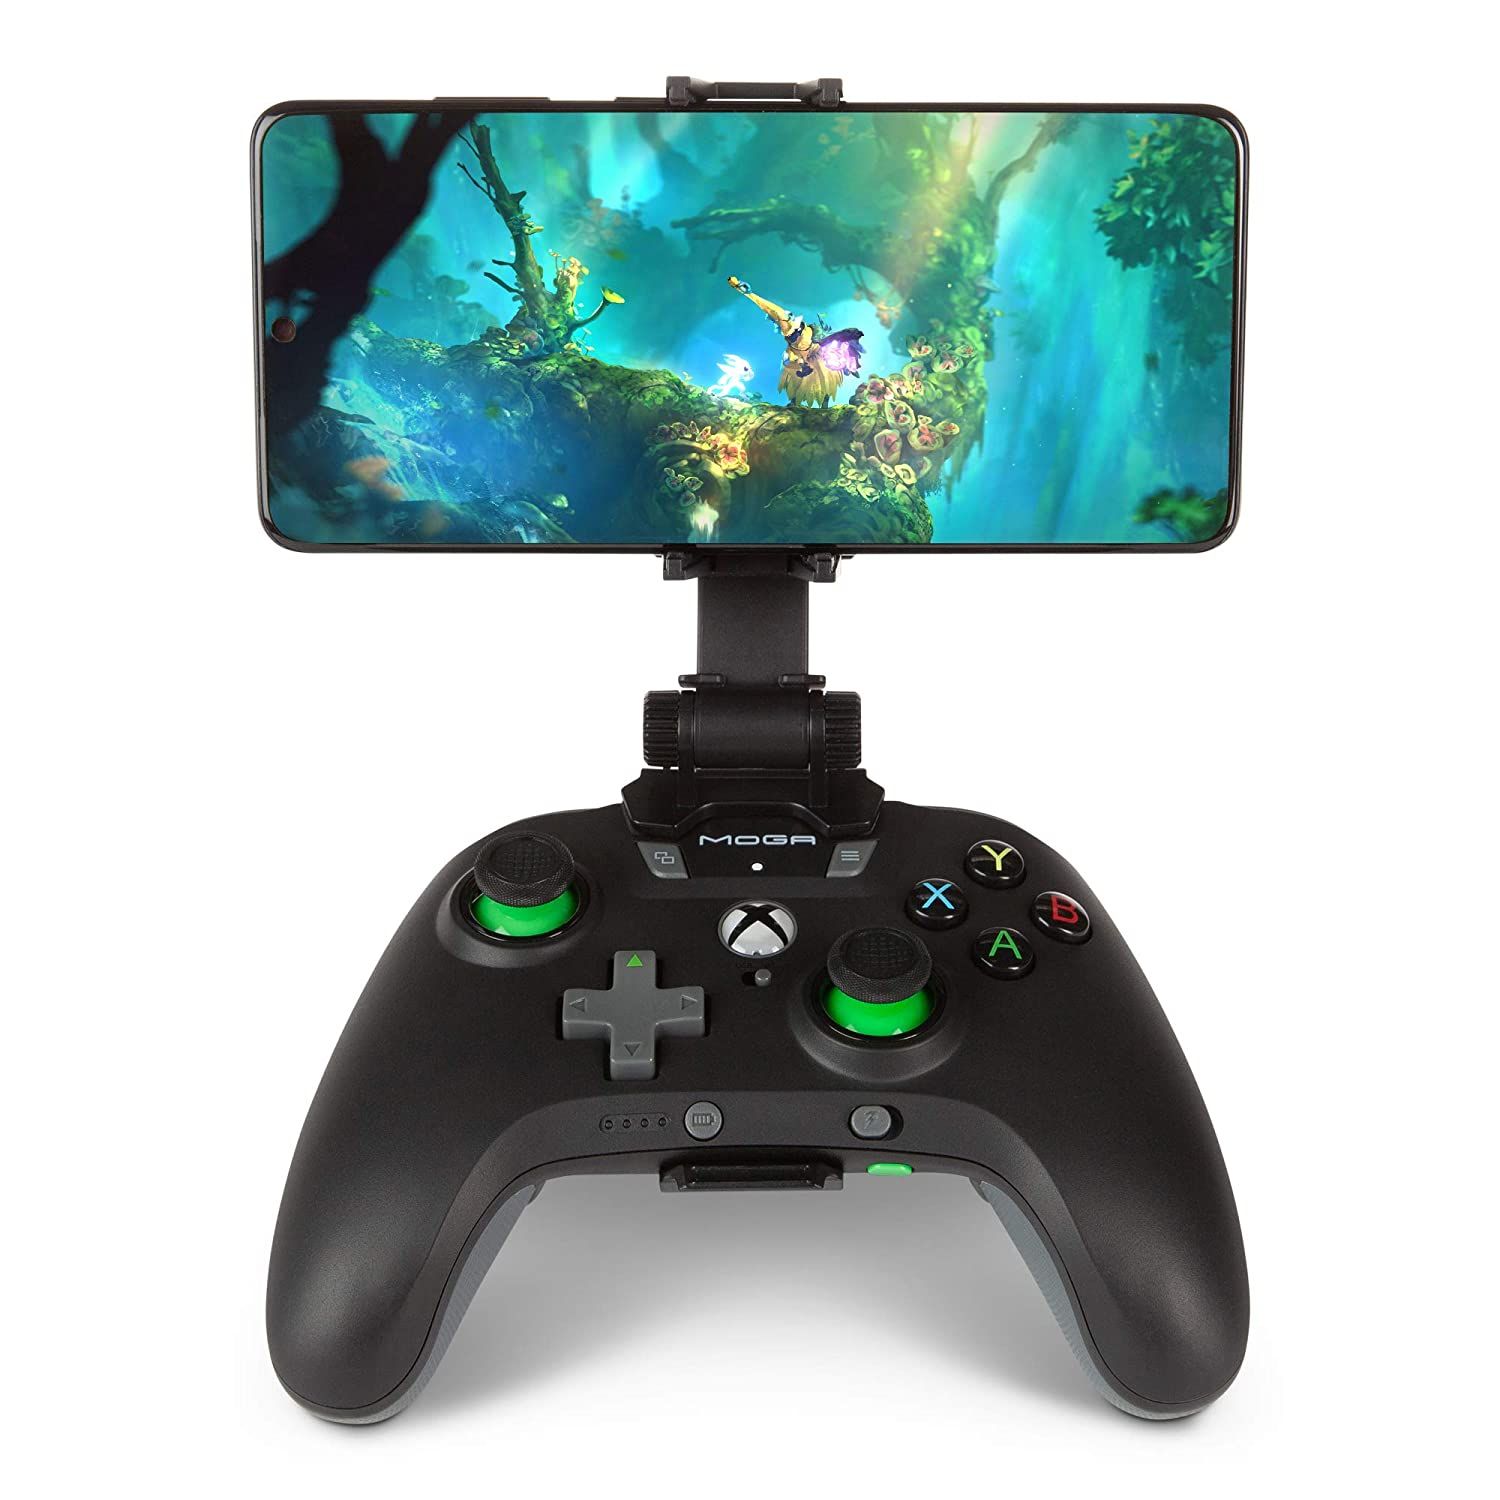 The best Bluetooth controllers for Android, PC, and more!